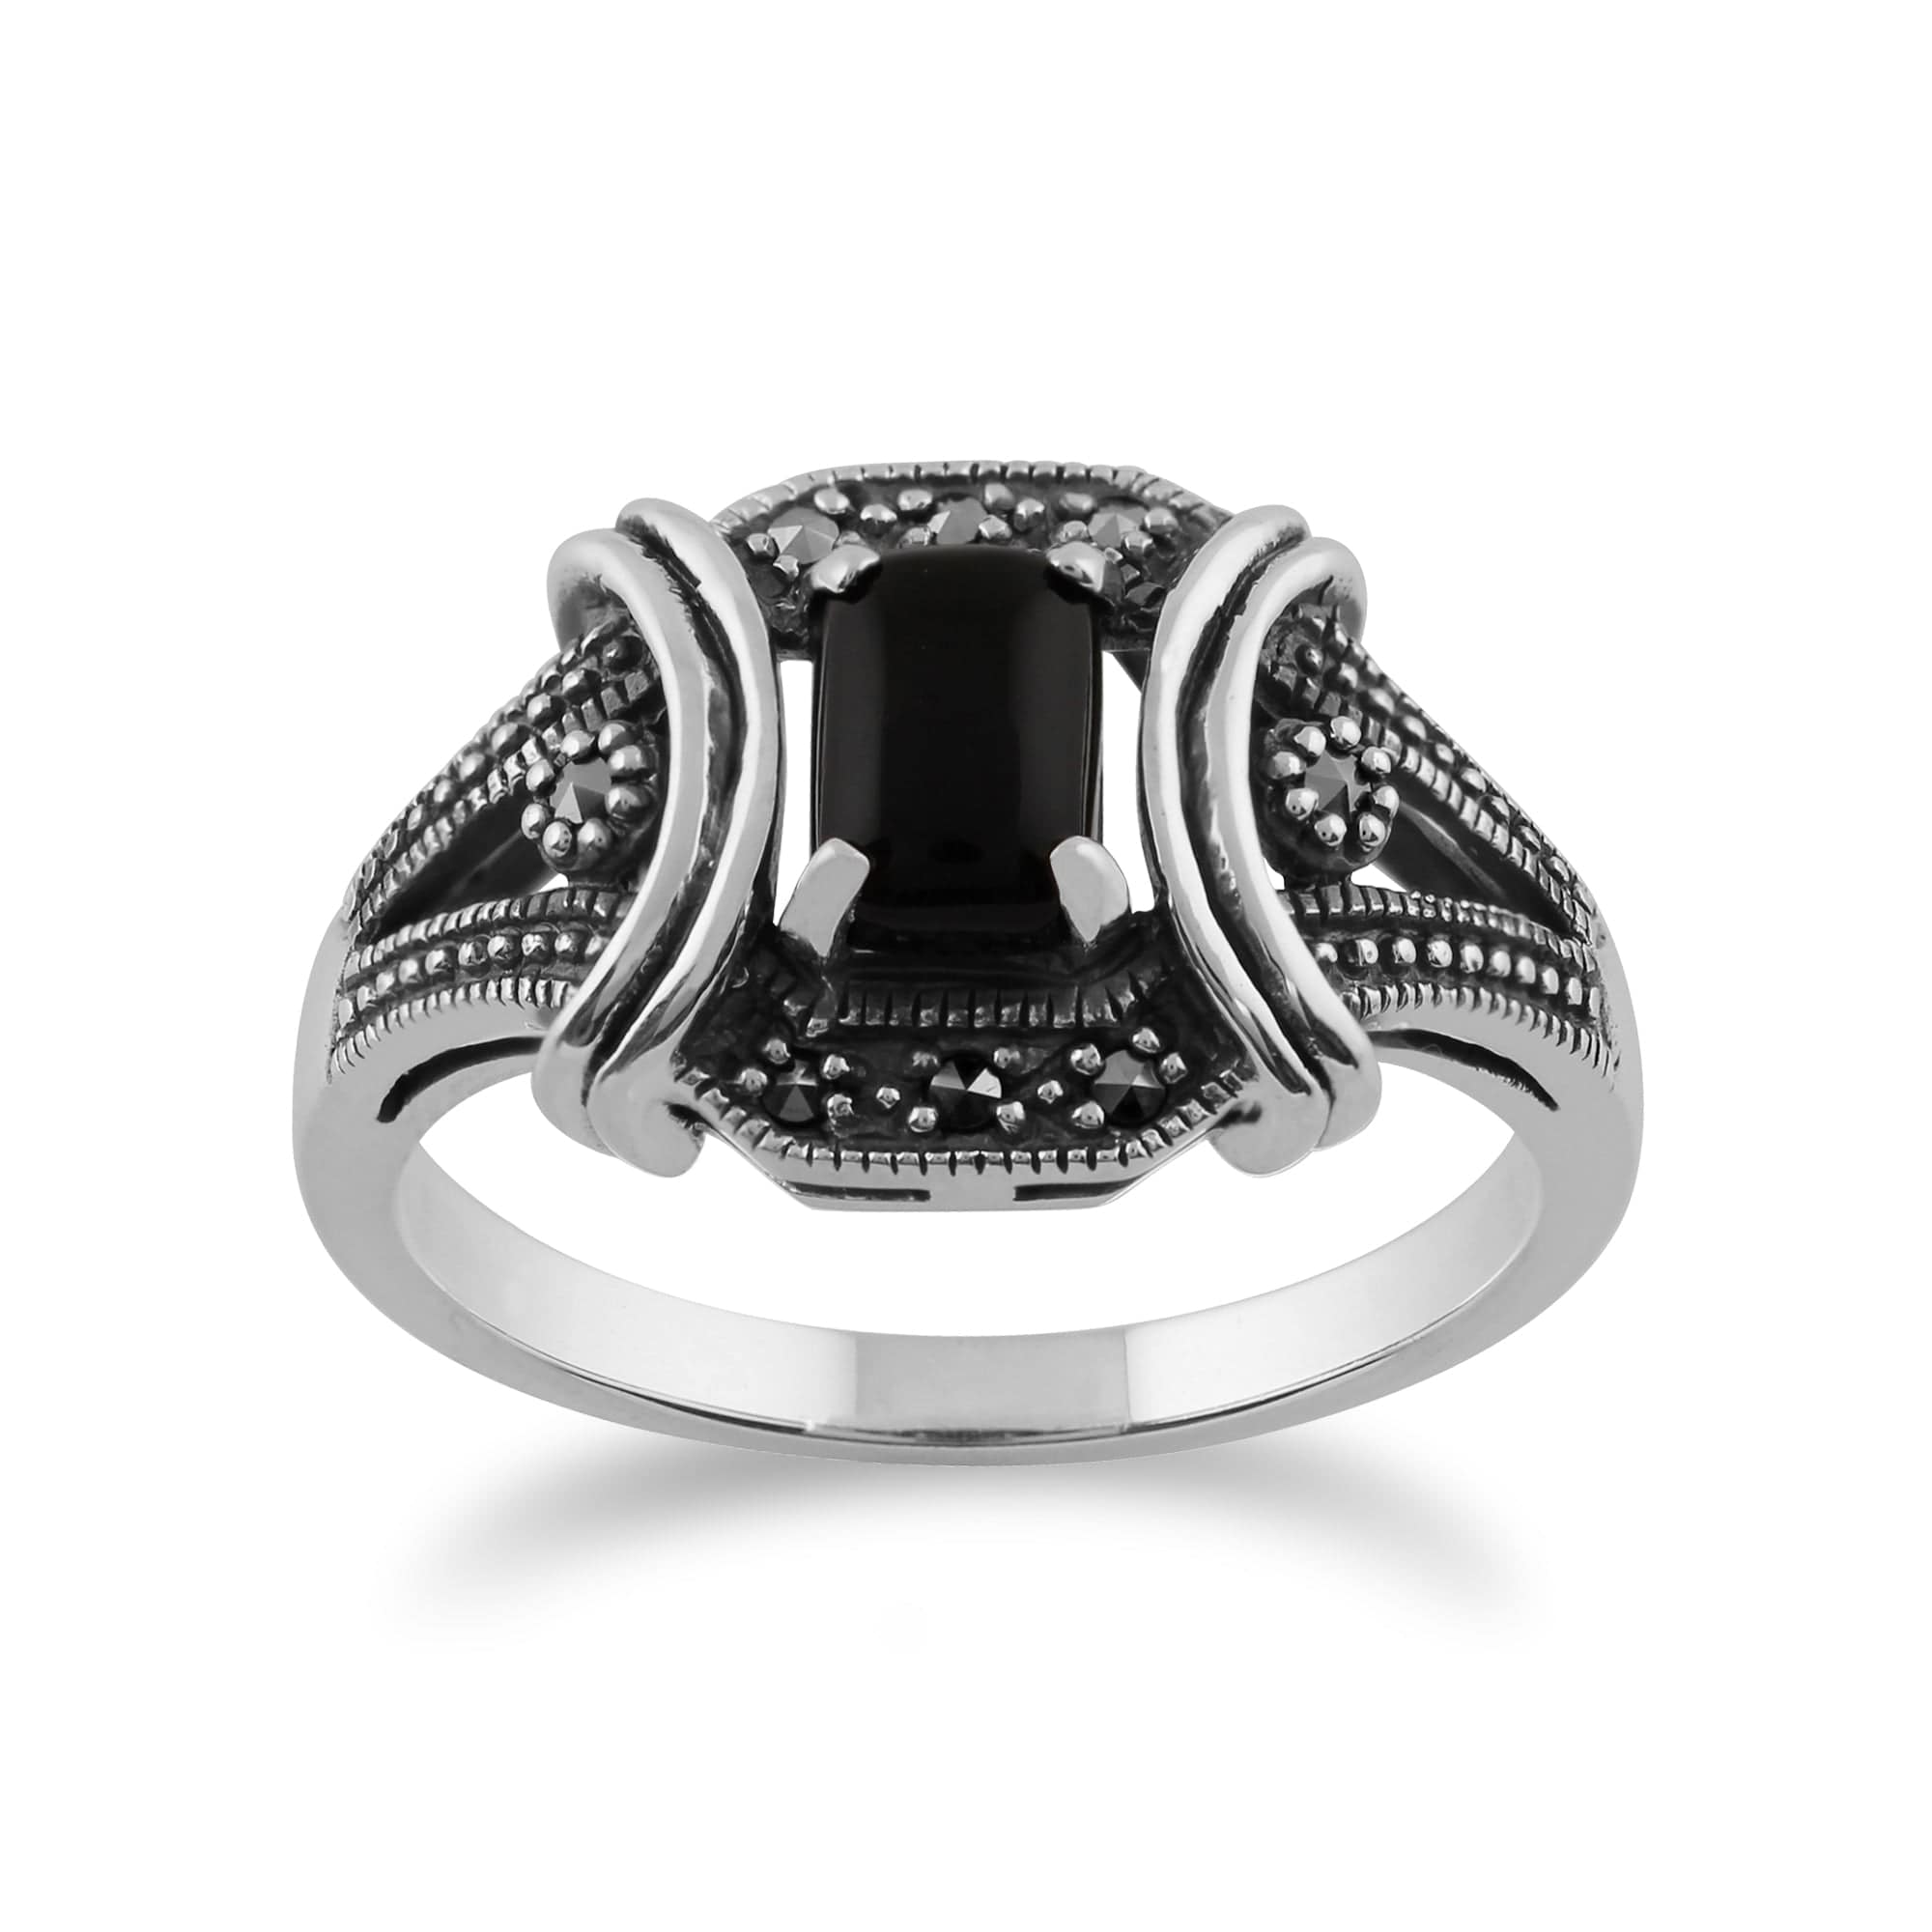 Art Deco Style Black Onyx Cabochon & Marcasite Ring in 925 Sterling Silver - Gemondo